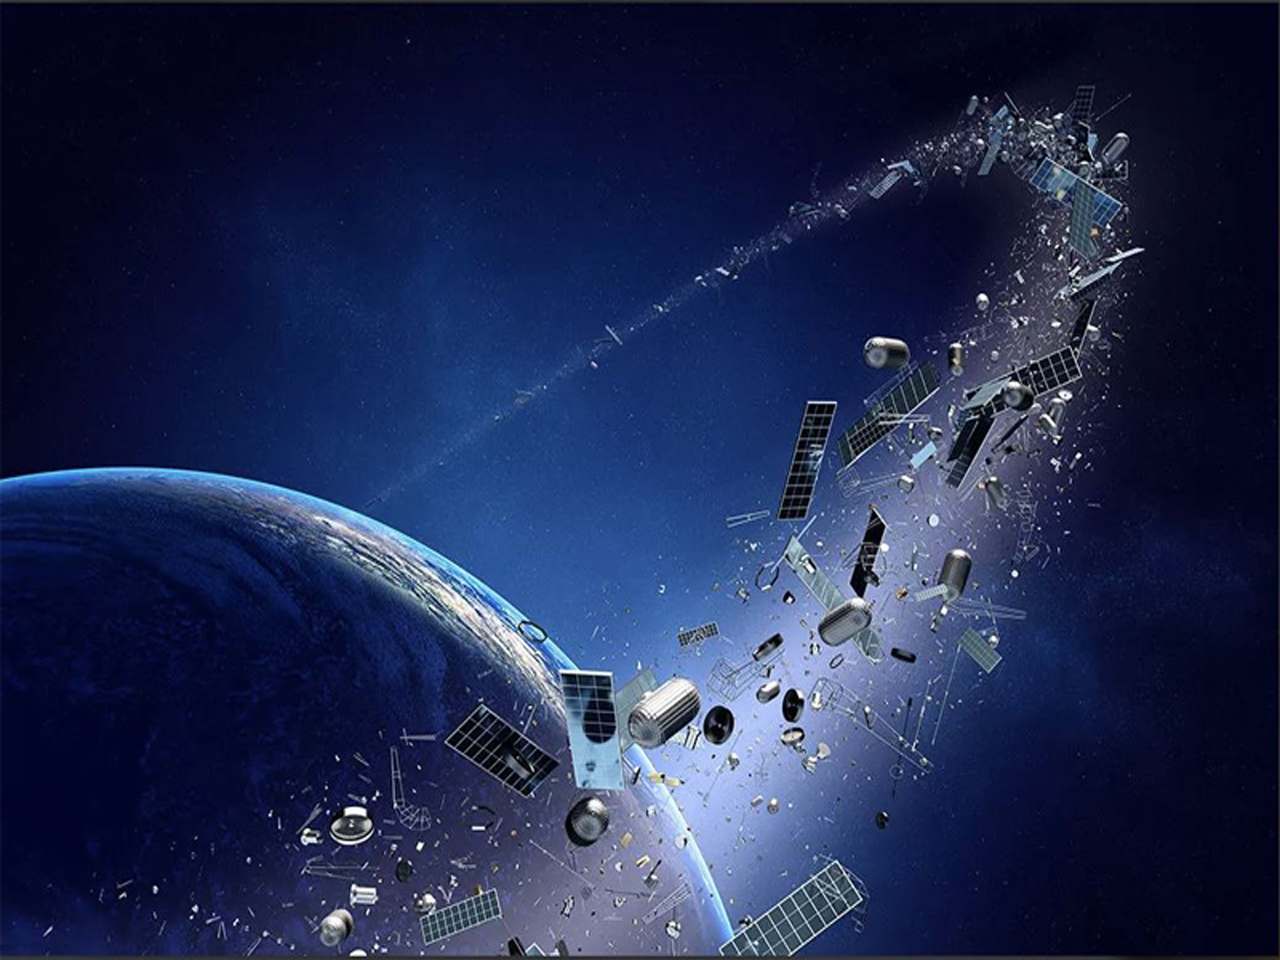 Russian space debris tracking complex opened in South Africa